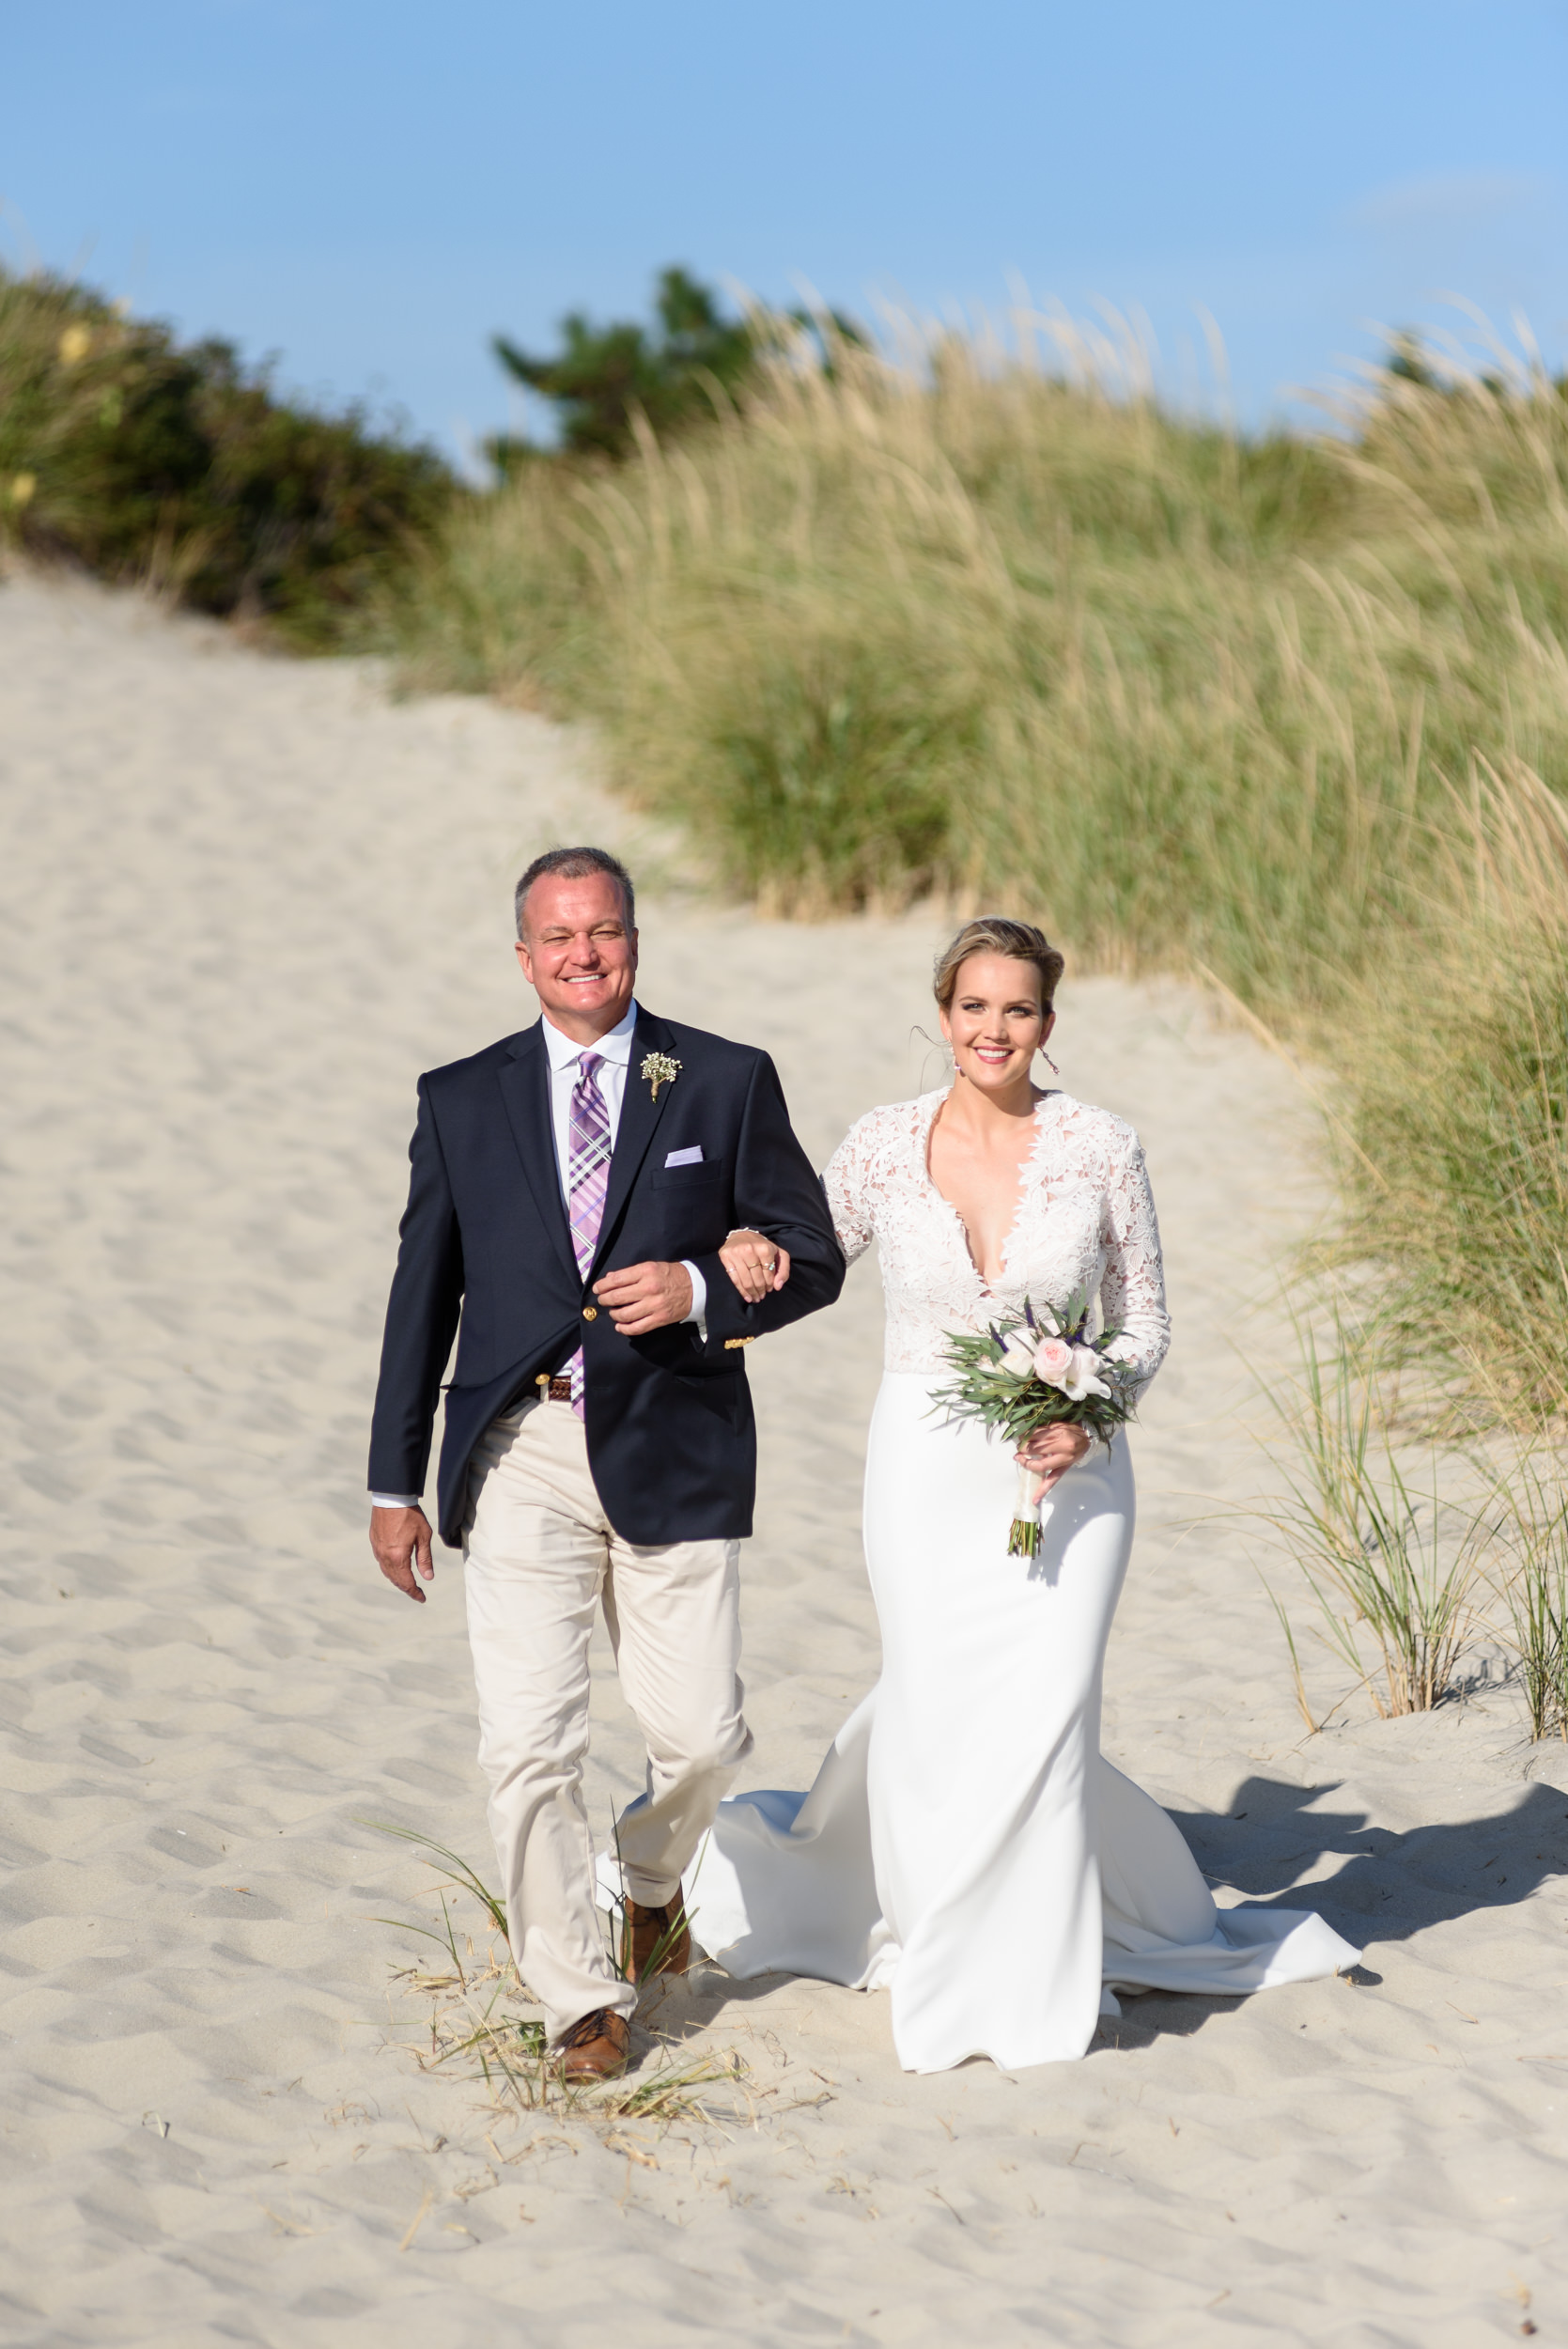 Cape May Point beach wedding photography